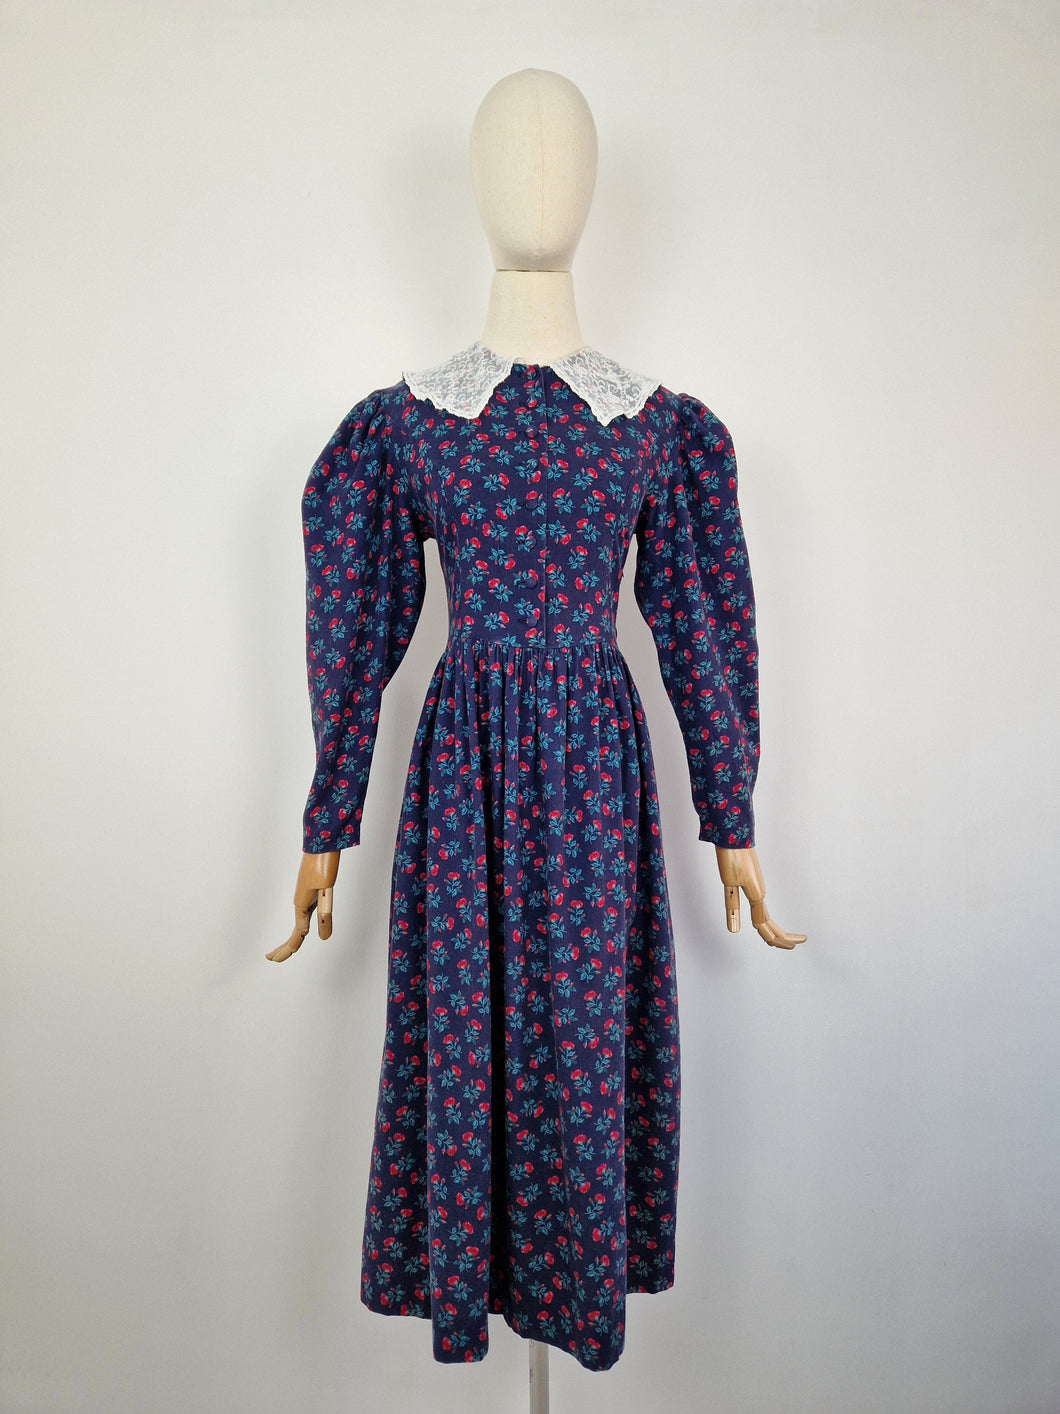 Vintage 80s Laura Ashley wool and cotton dress